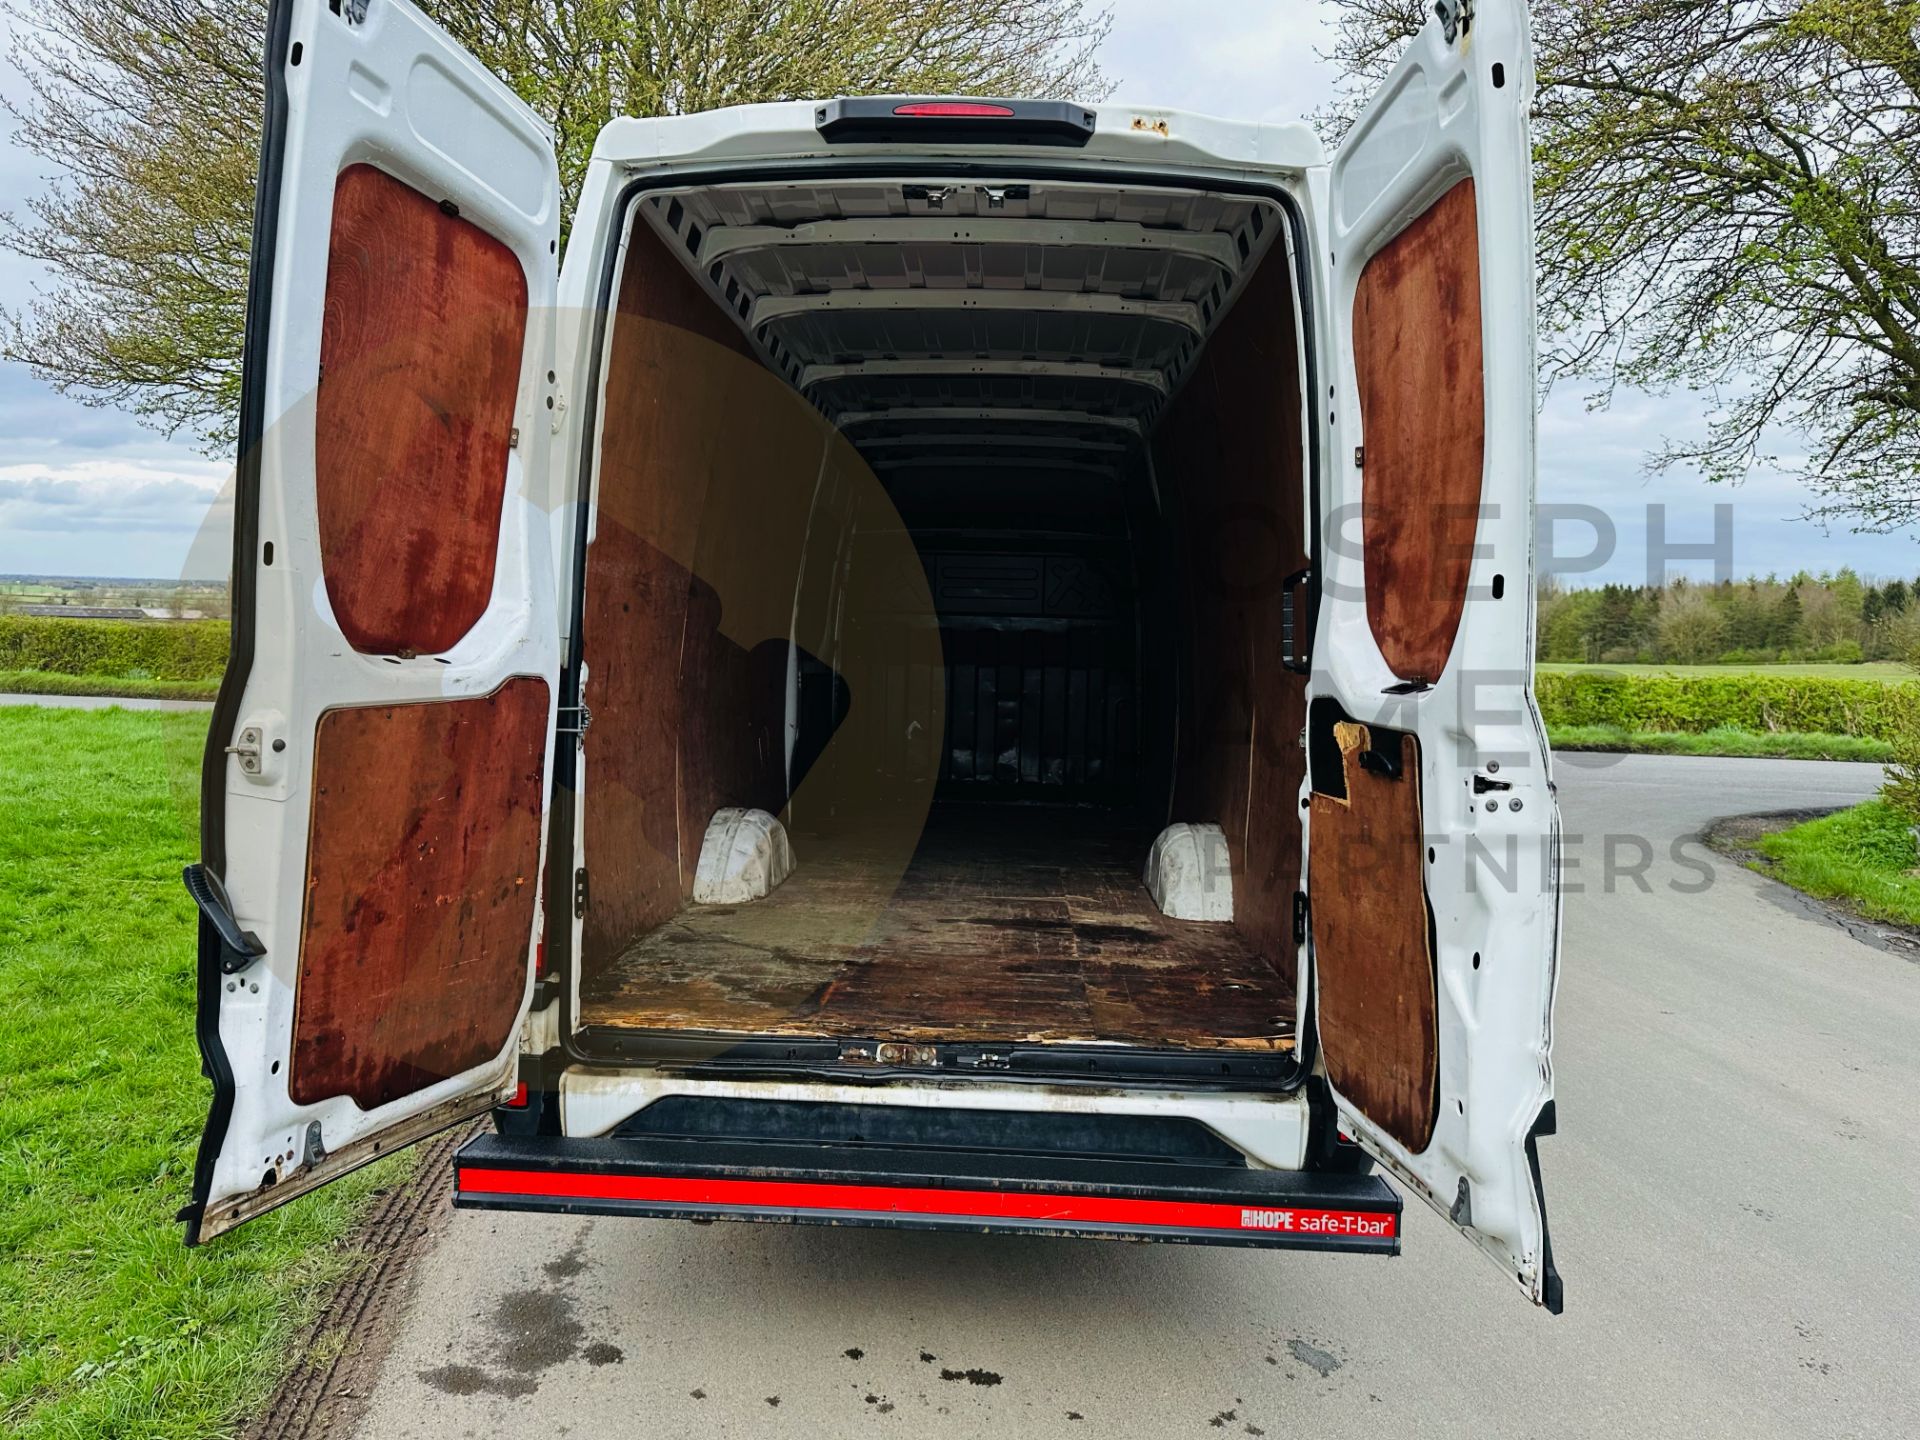 IVECO DAILY 35-140 LONG WHEEL BASE HIFG ROOF - 2021 REG (NEW SHAPE) ONLY 85K MILES - AIR CON - LOOK! - Bild 11 aus 30